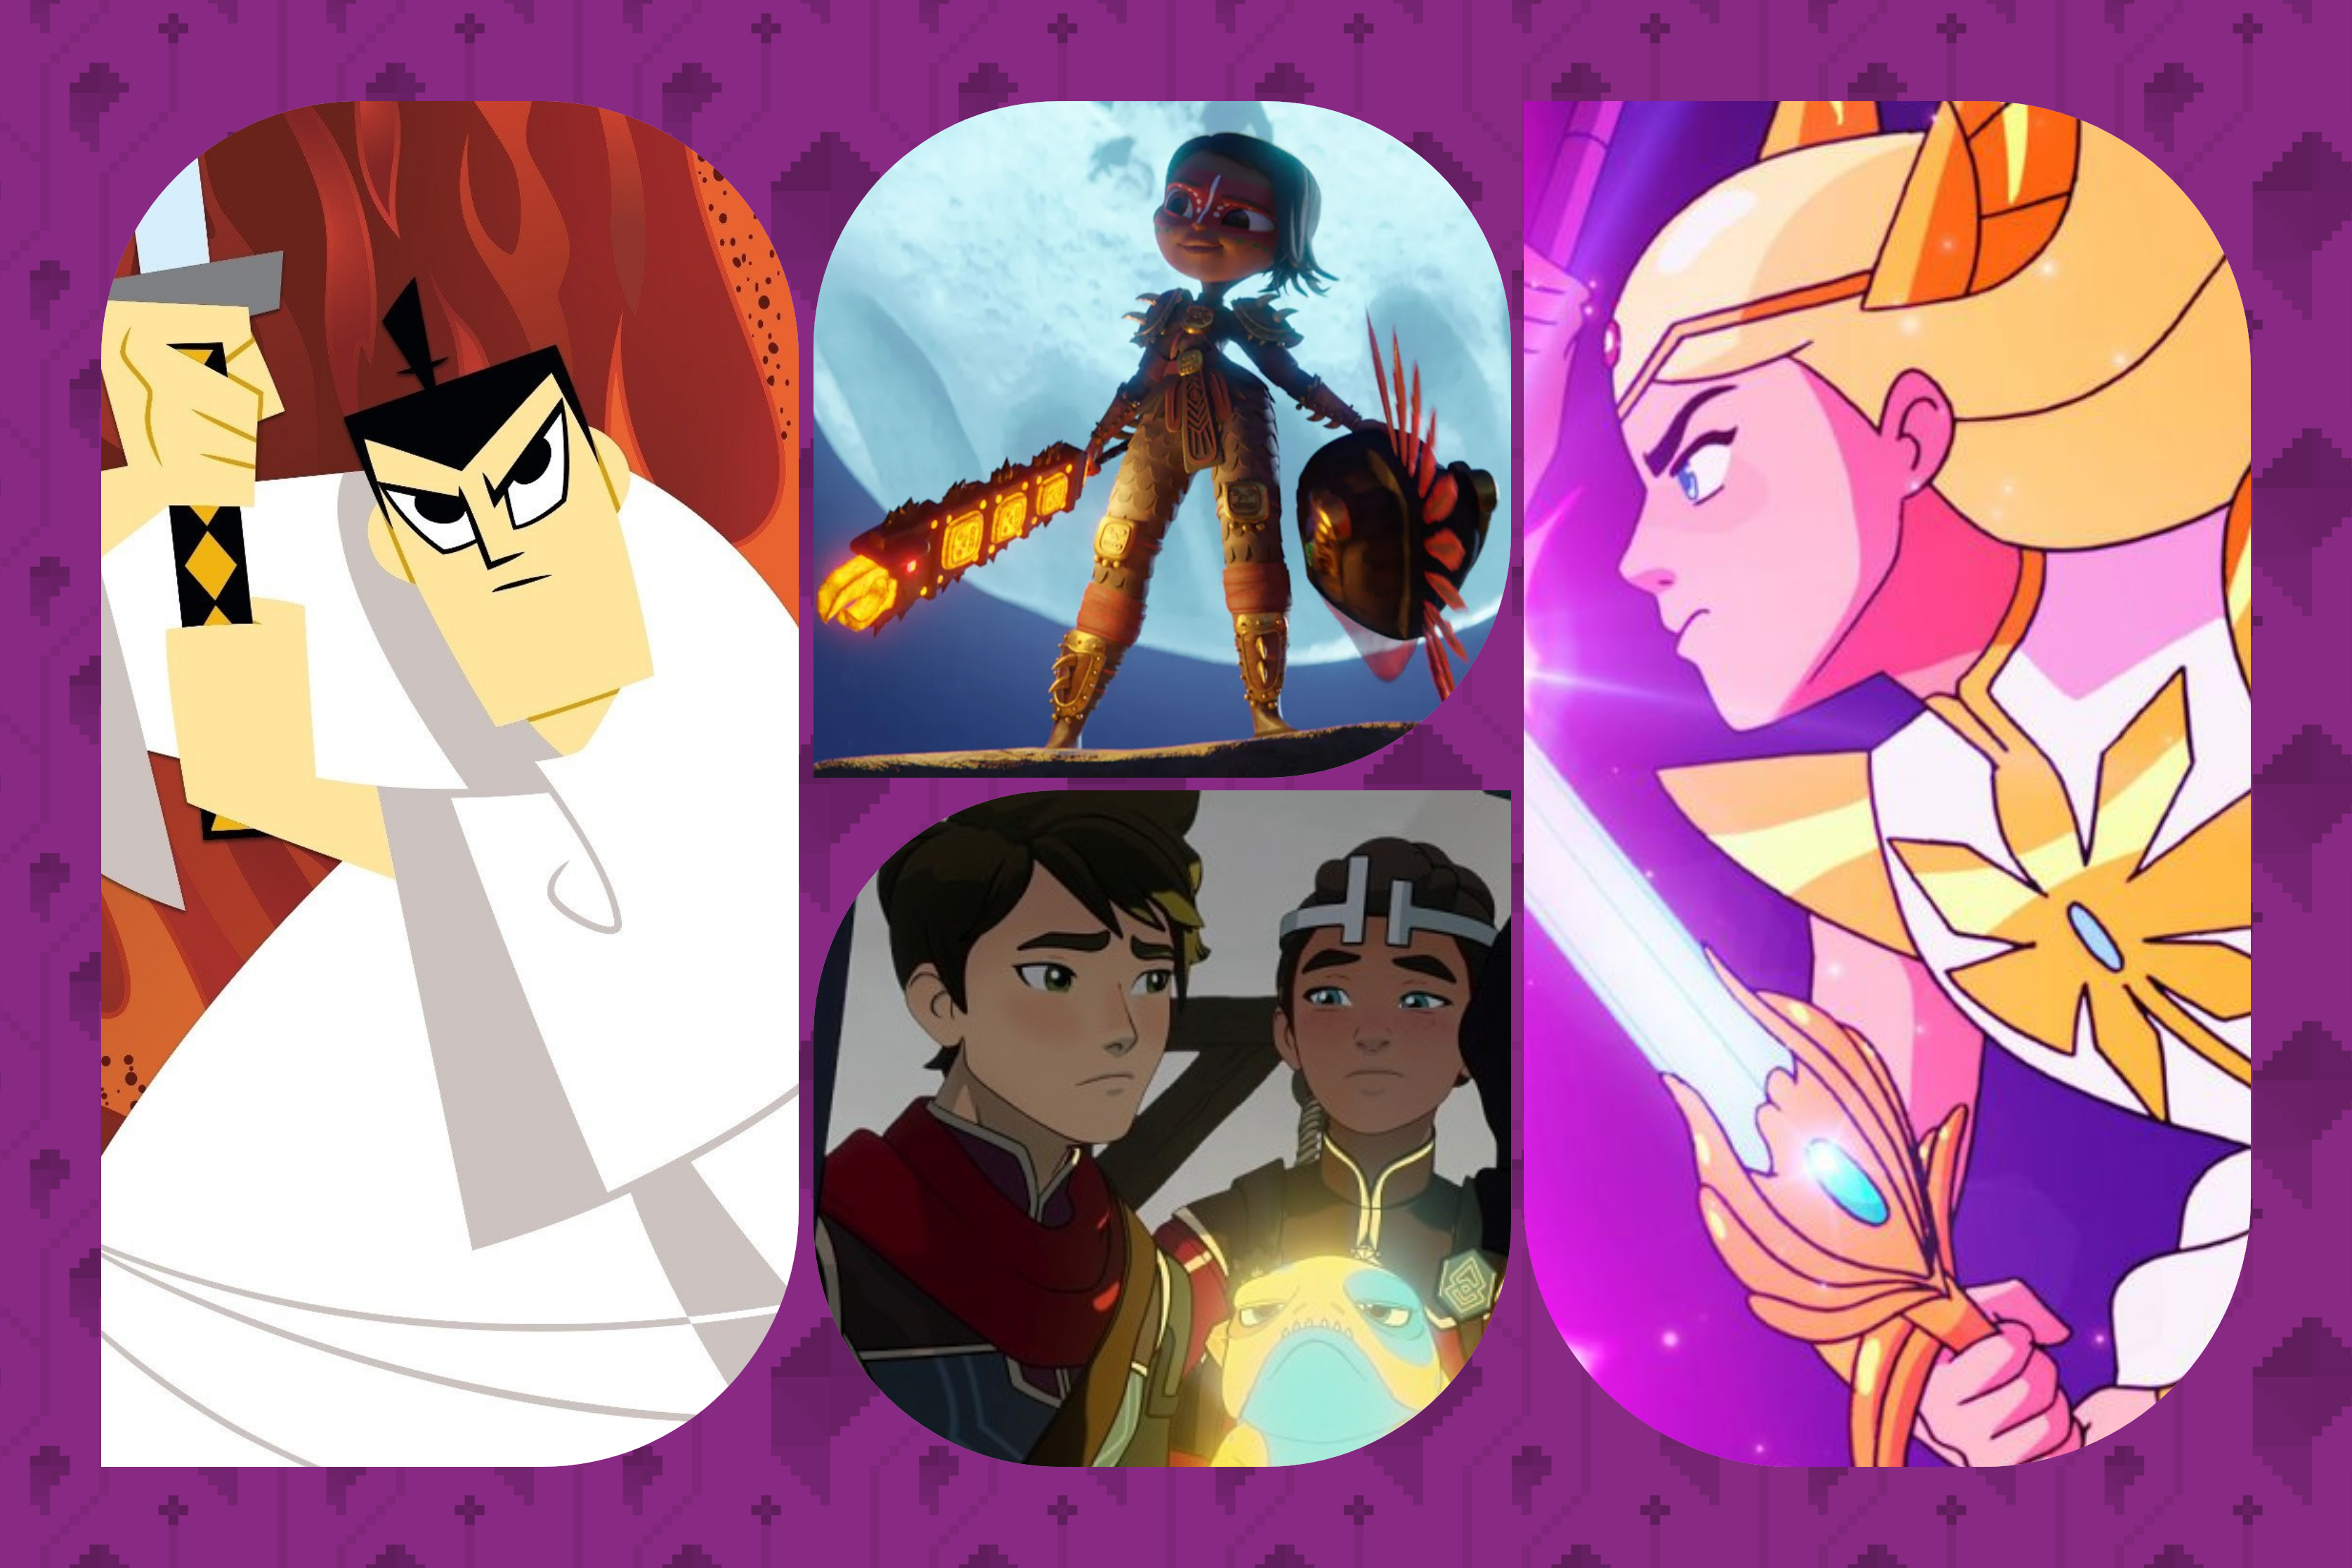 A collage featuring Samurai Jack, Maya and the Three, the Dragon Prince, and She-Ra